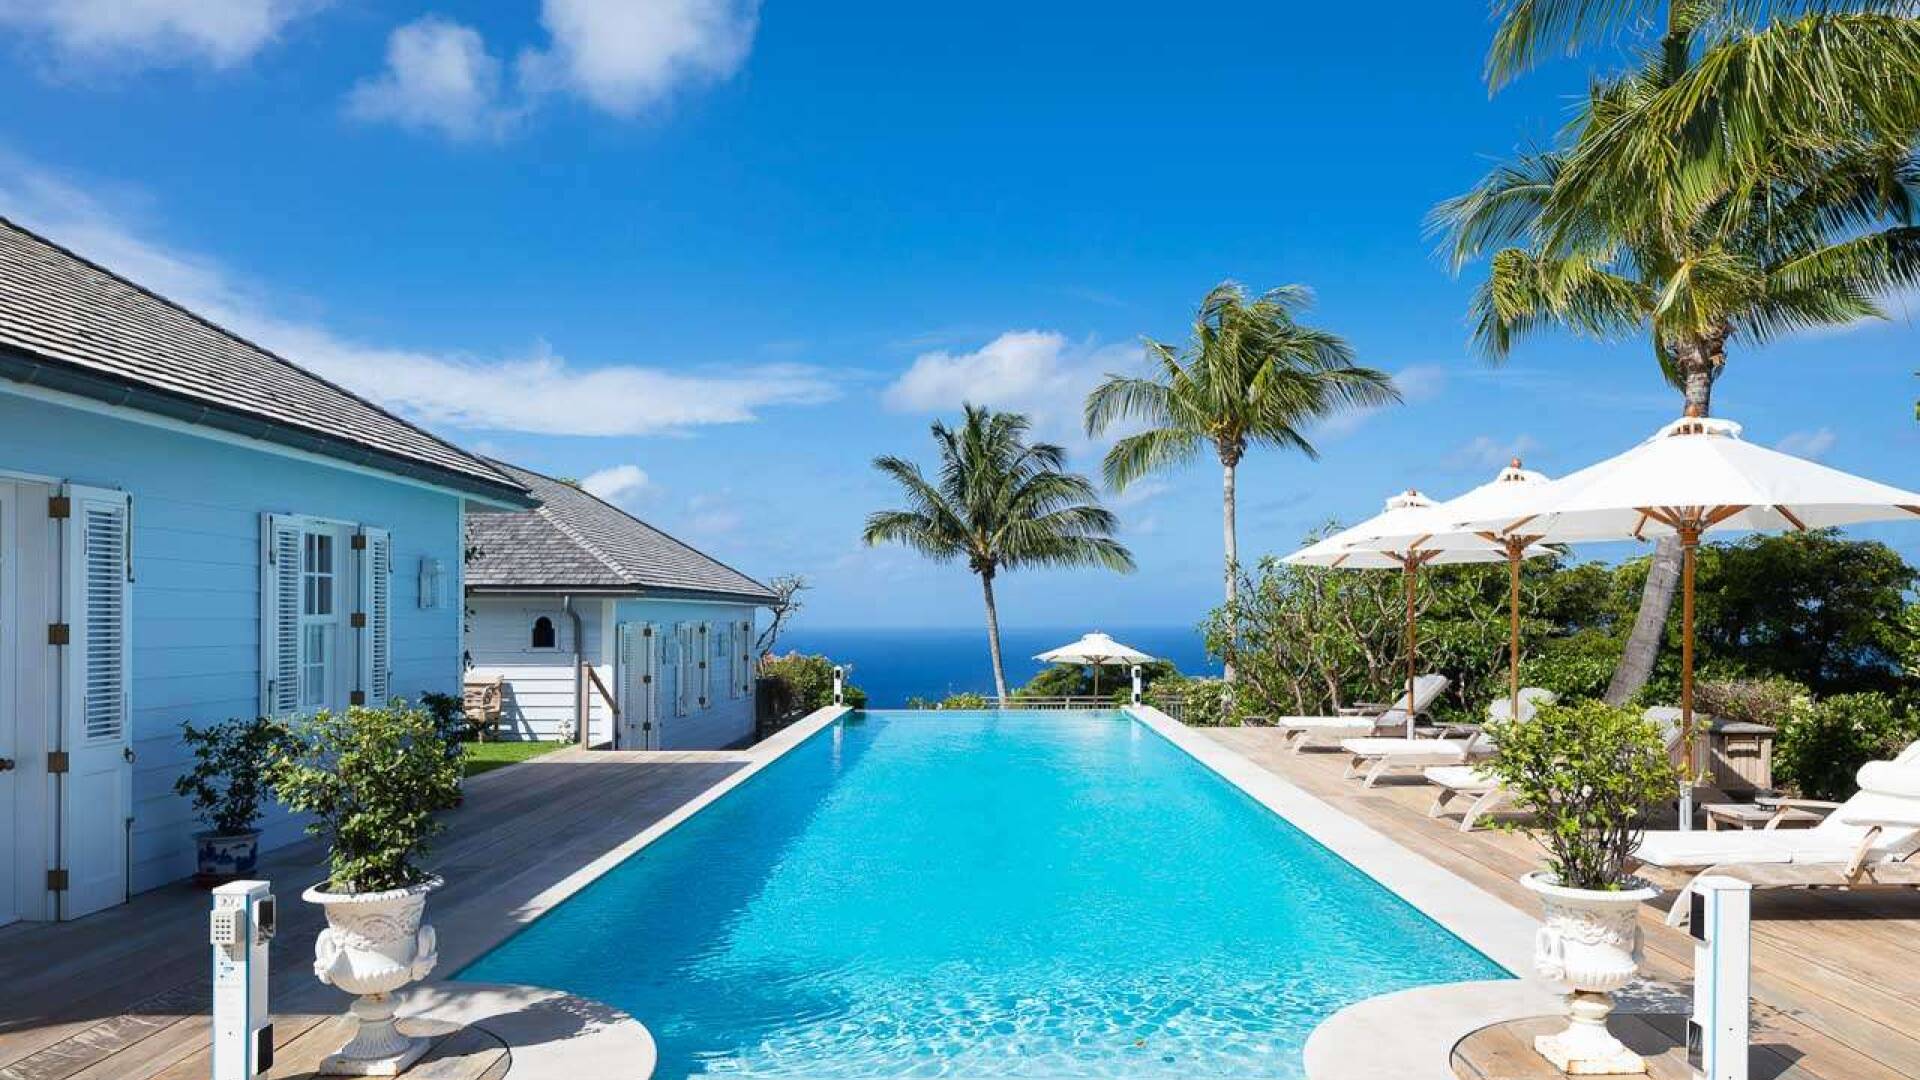 Villa Pool at WV PBO, Colombier, St. Barthelemy